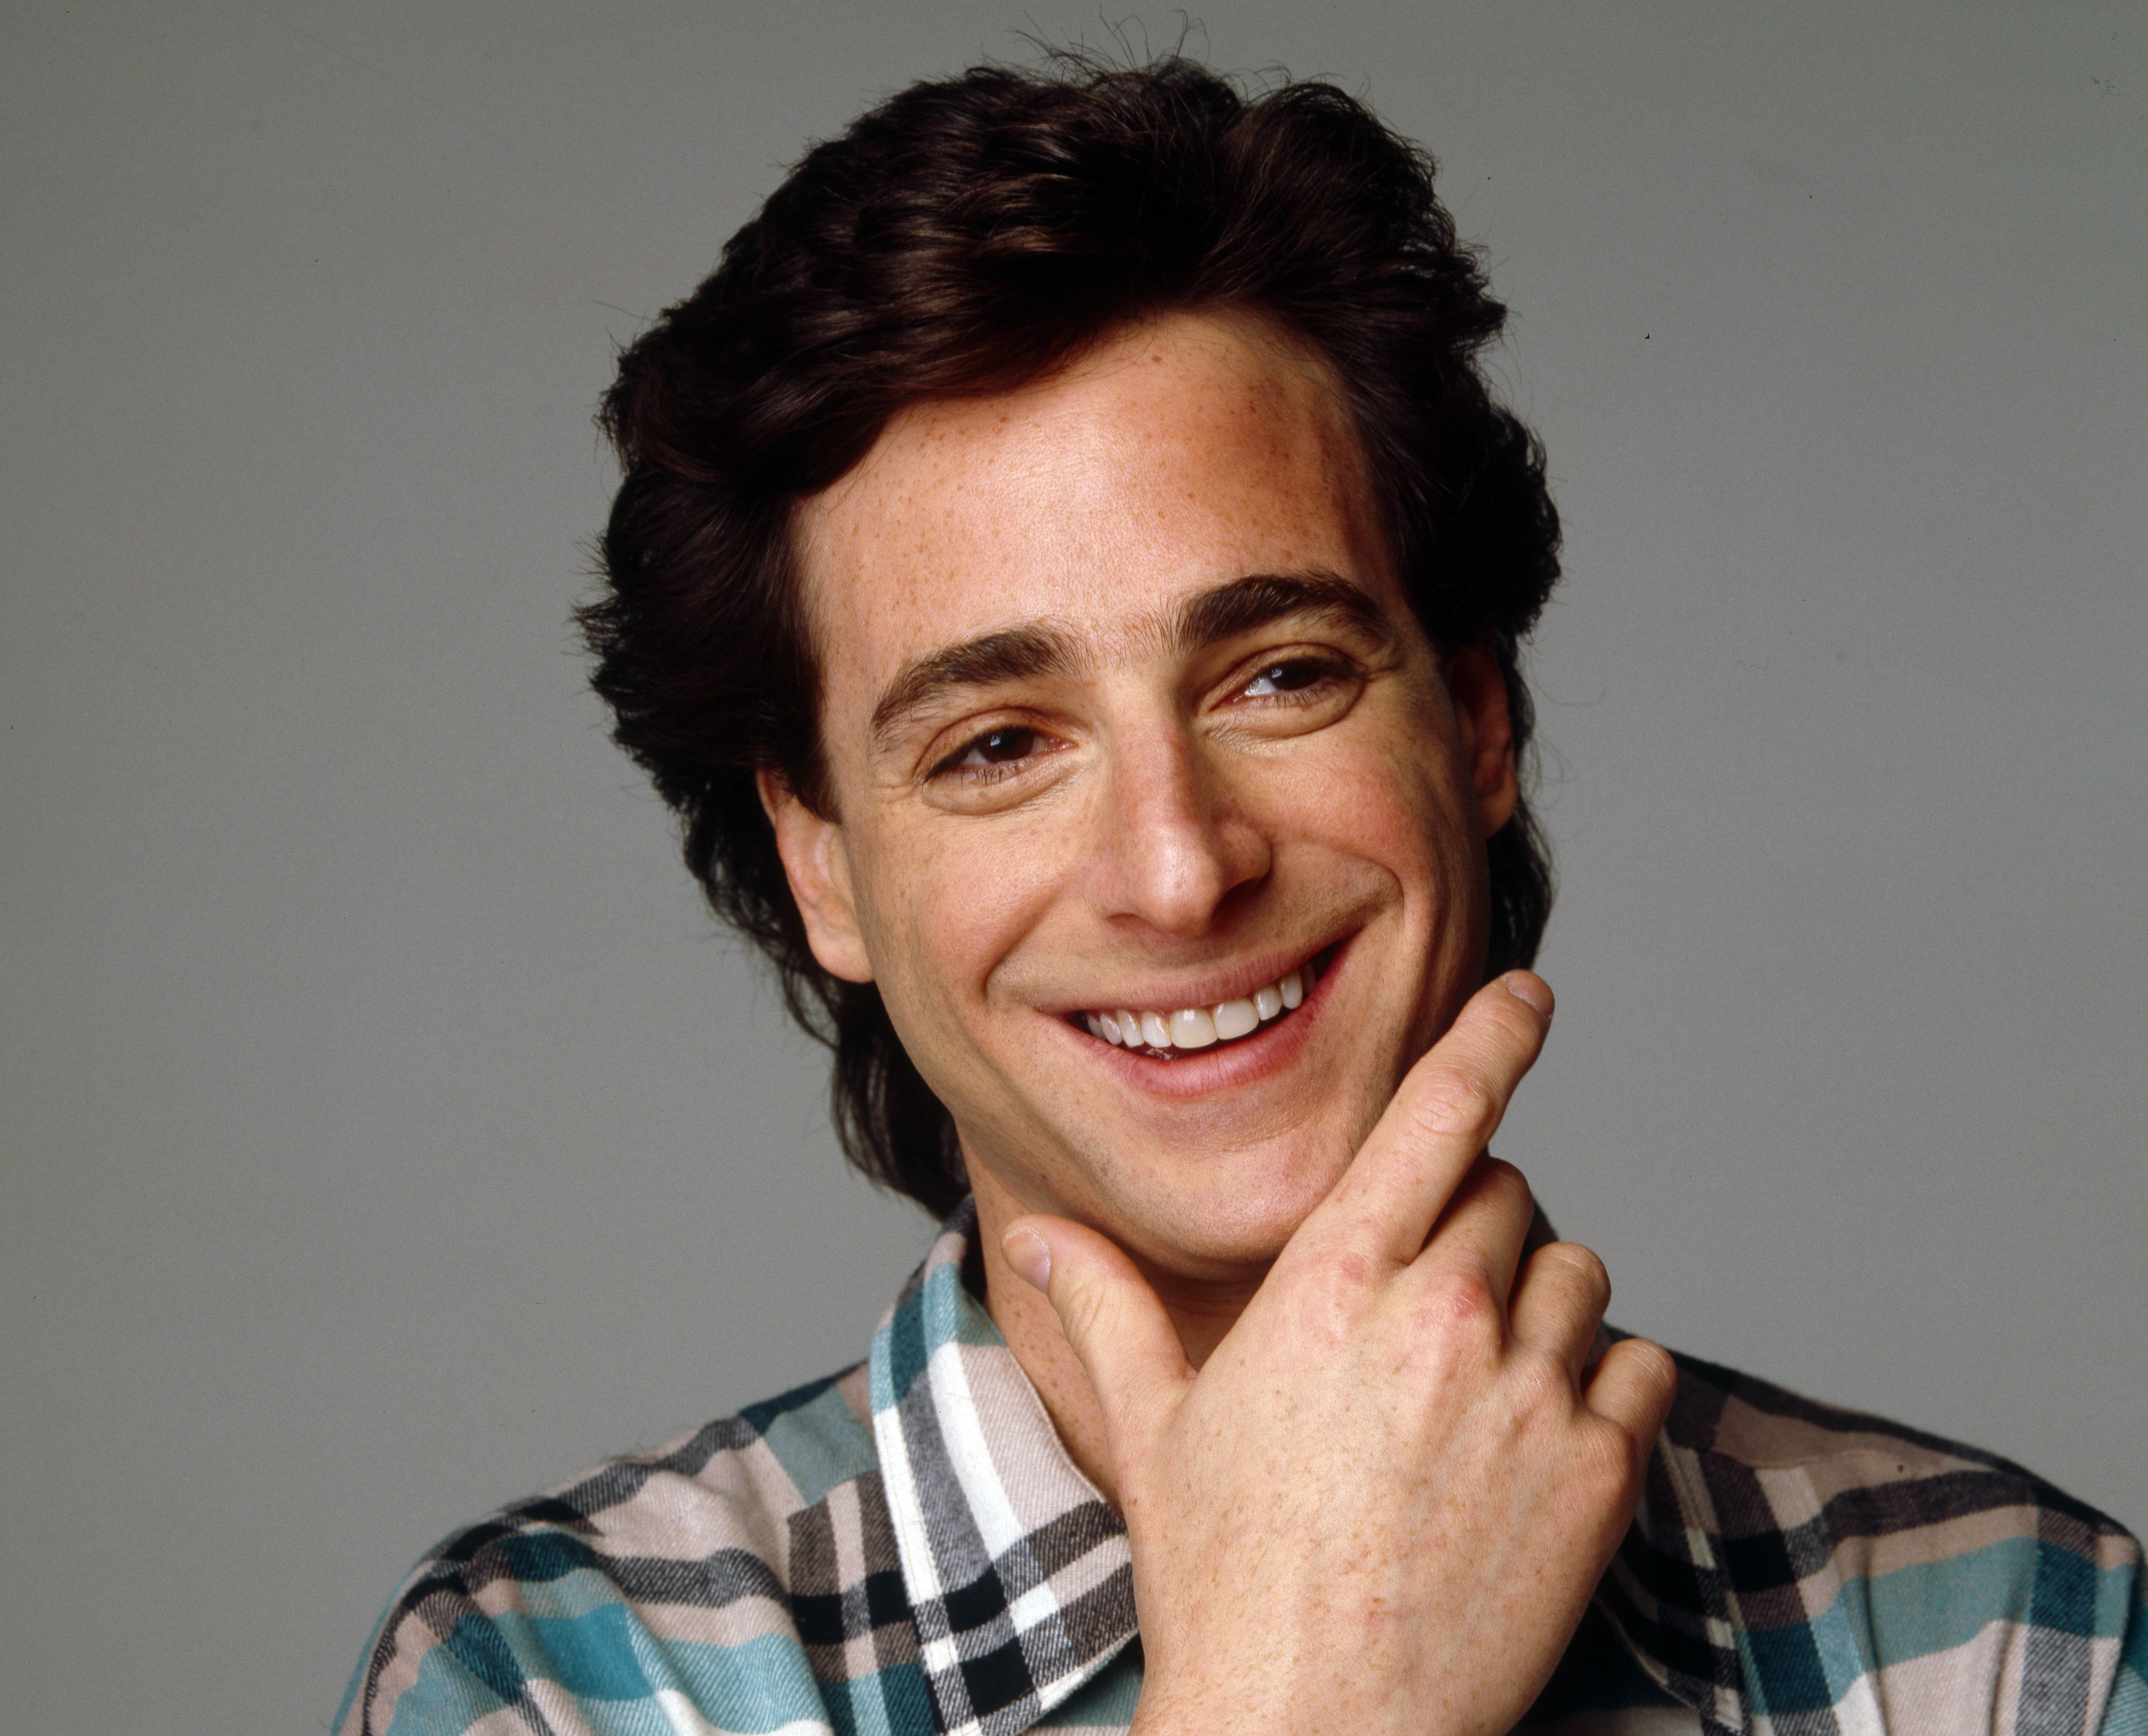 Bob Saget promotional photo for the ABC tv series “Full House” taken in Los Angeles California in 1993 | Source: Getty Images